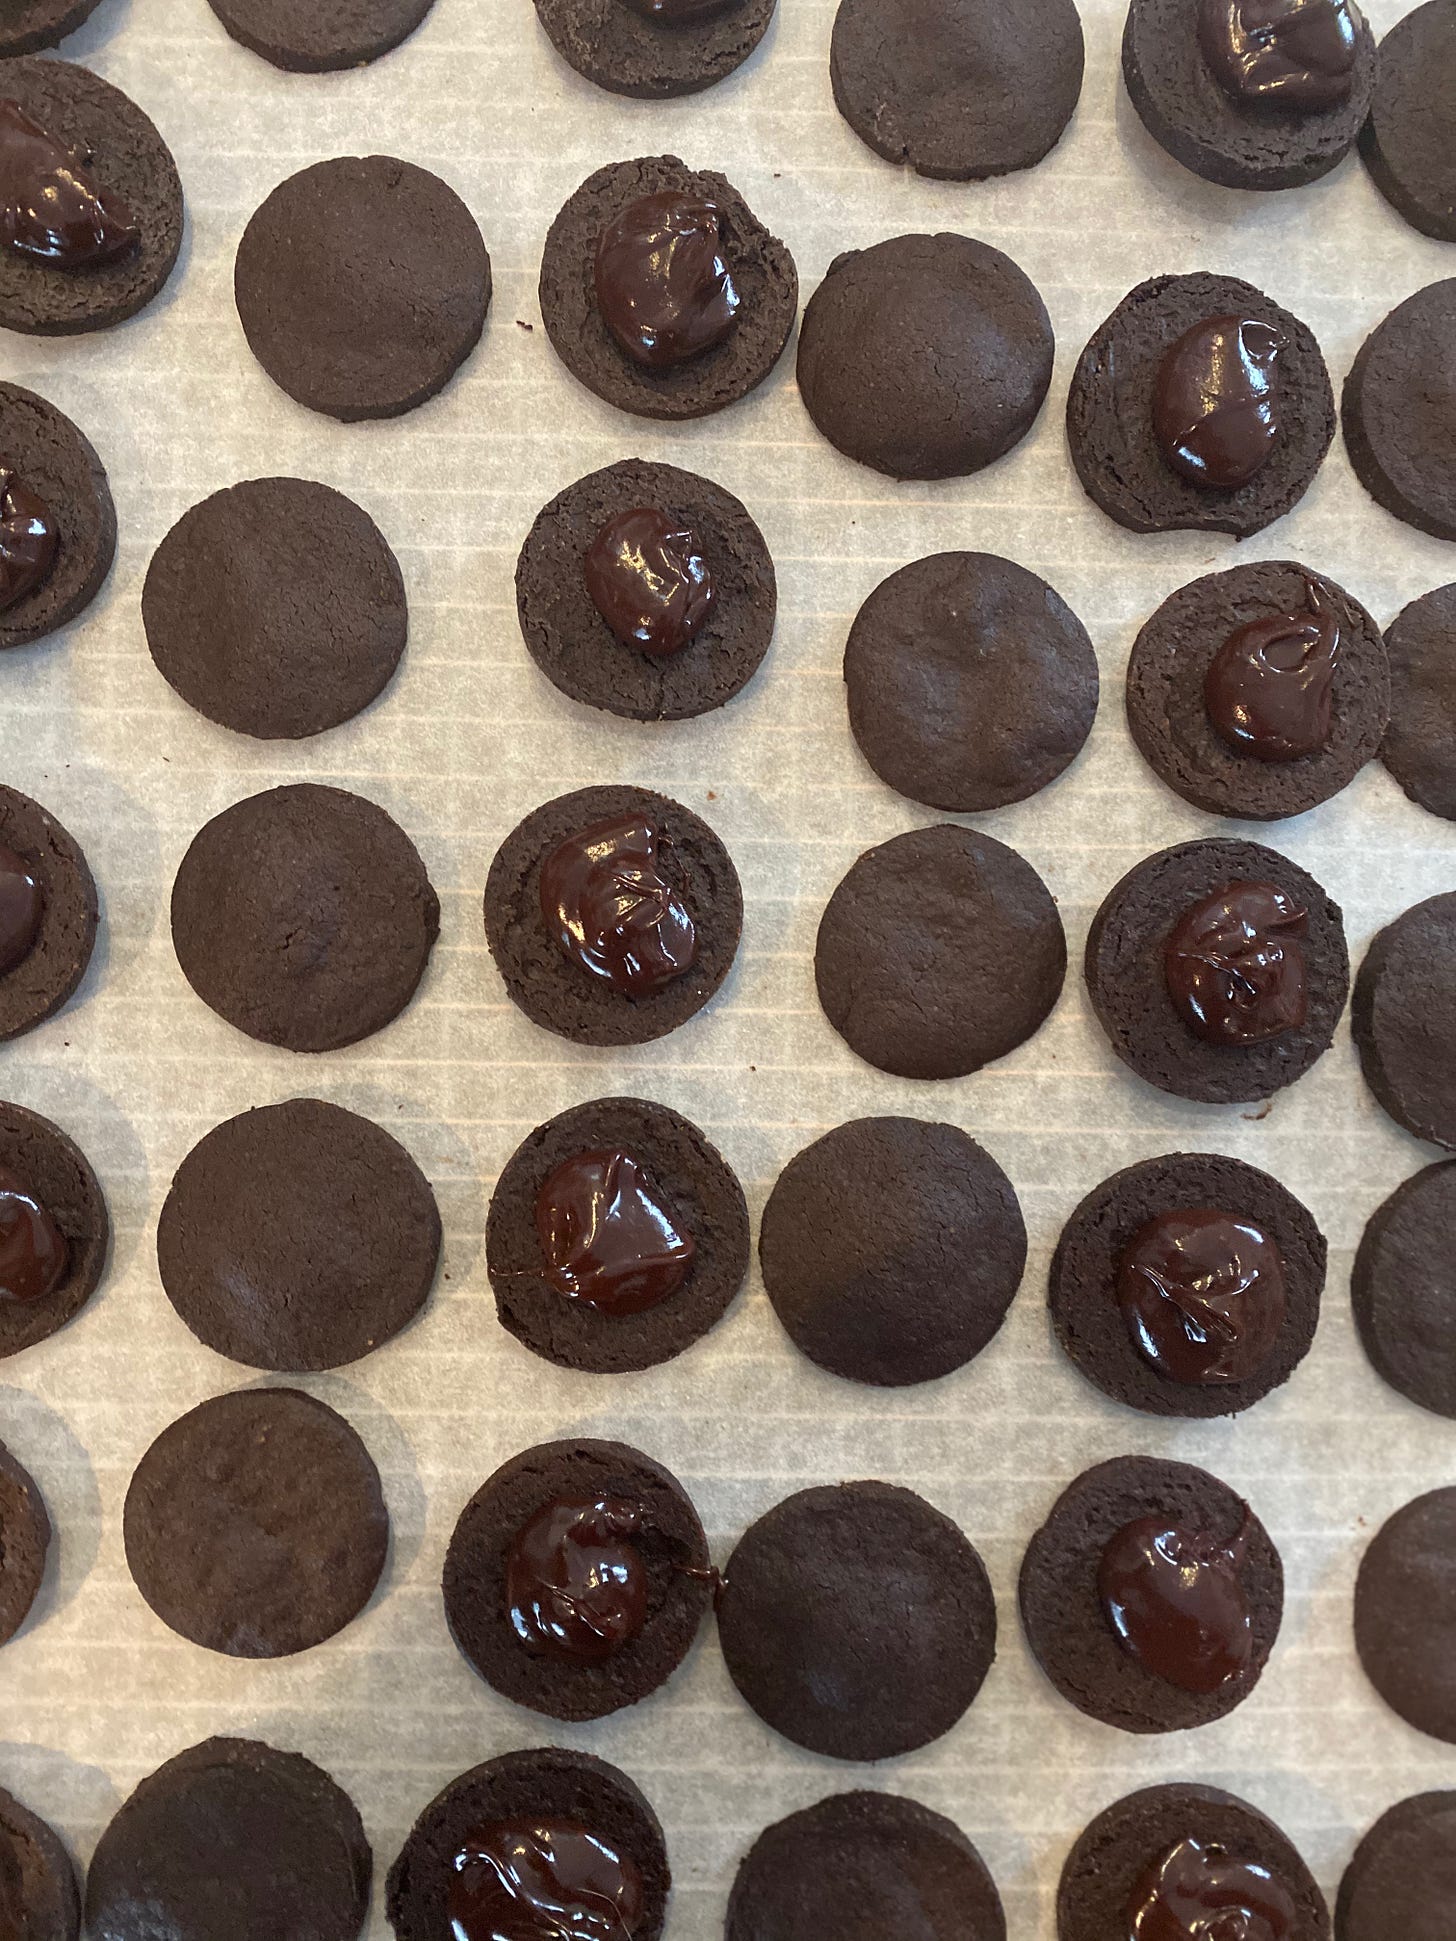 Many chocolate O cookies sit on a sheet of parchment paper waiting to be sandwiched. There are alternating rows of plain round chocolate cookies, and plain round chocolate cookies topped with a dollop of chocolate ganache.